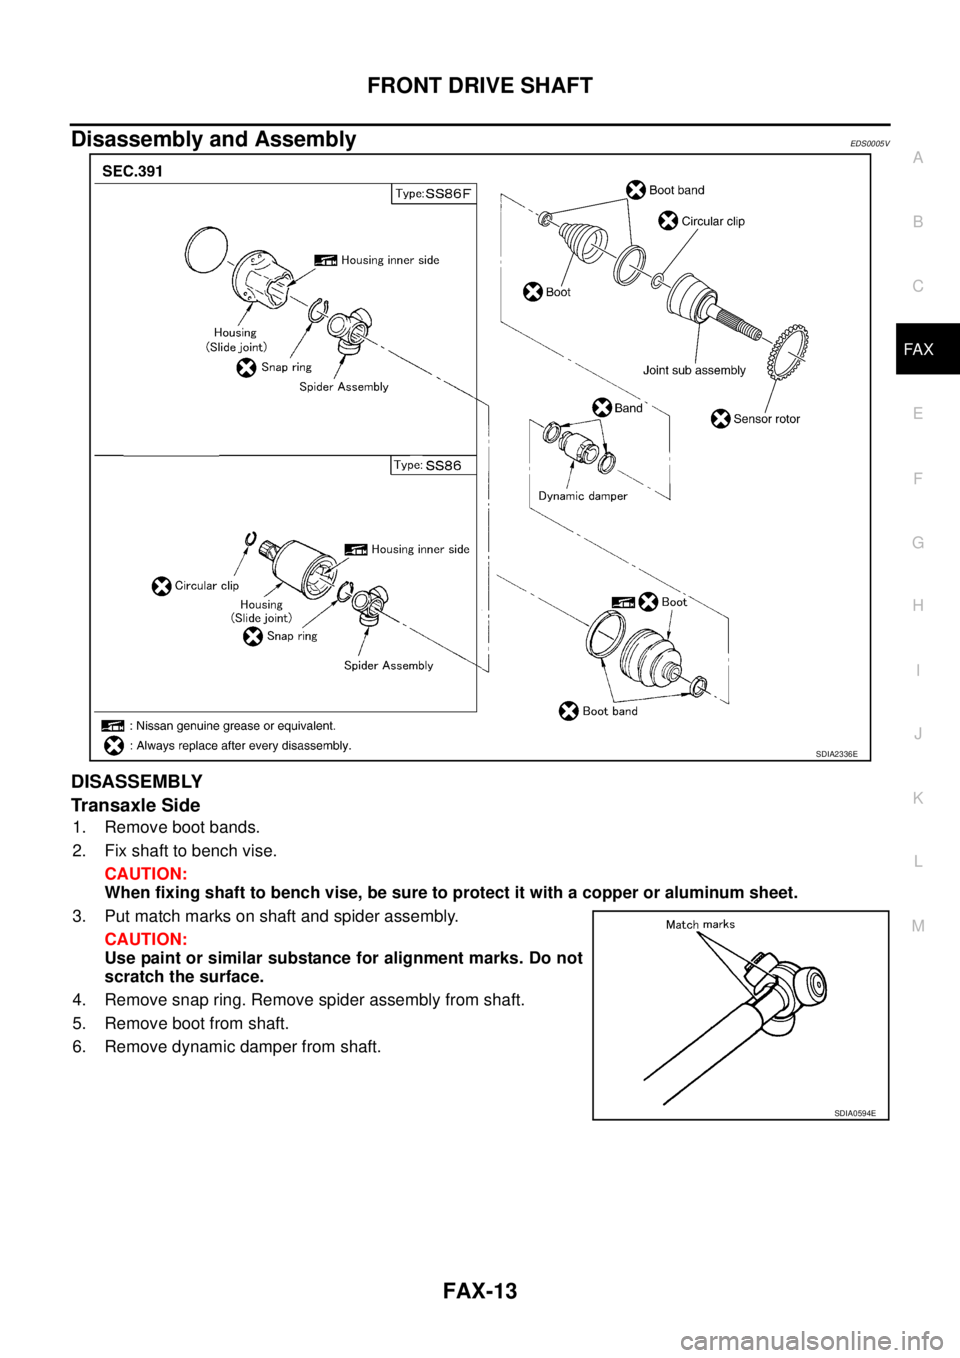 NISSAN X-TRAIL 2003  Service Repair Manual FRONT DRIVE SHAFT
FAX-13
C
E
F
G
H
I
J
K
L
MA
B
FA X
 
Disassembly and AssemblyEDS0005V
DISASSEMBLY
Transaxle Side
1. Remove boot bands.
2. Fix shaft to bench vise.
CAUTION:
When fixing shaft to bench